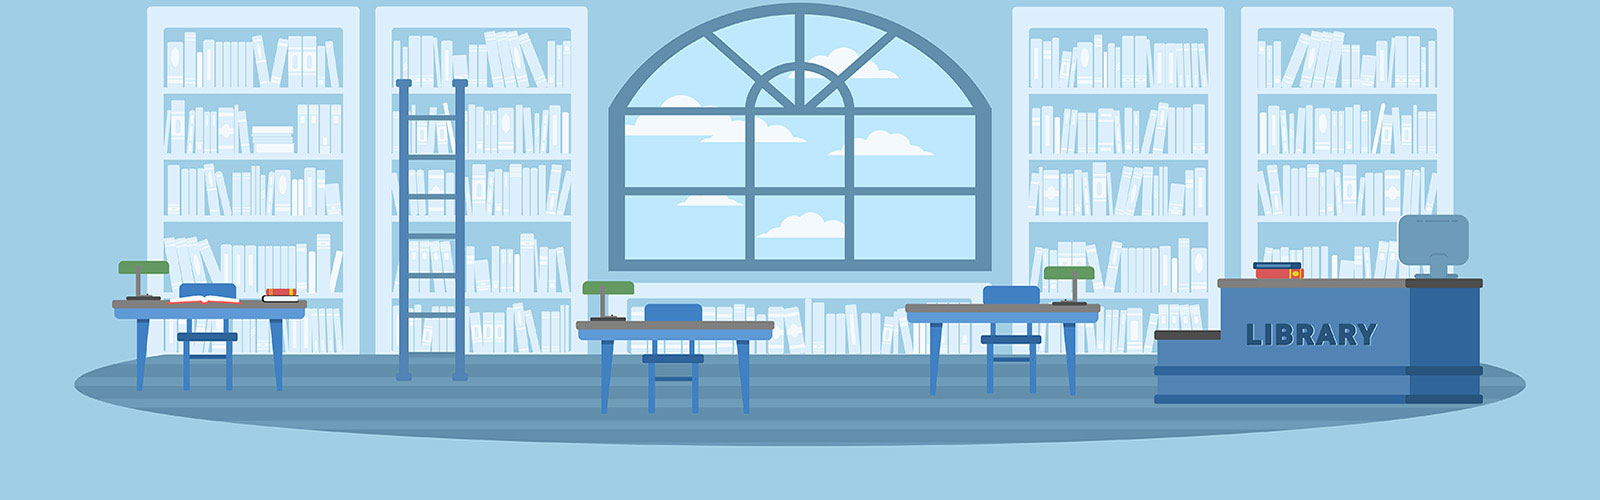 graphic depicting library interior